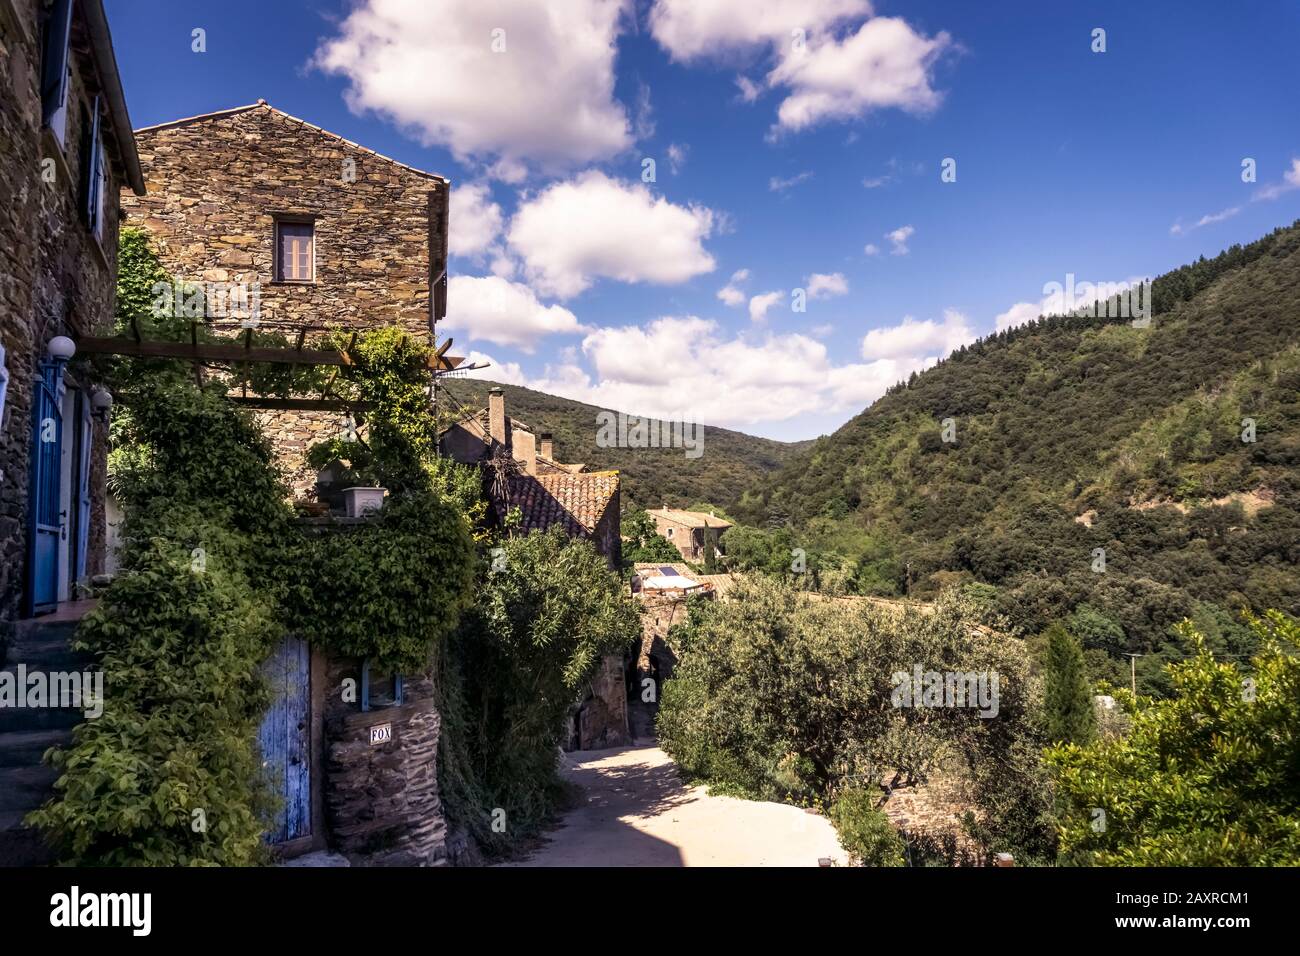 Village near Roquebrun. The hamlet is built directly on the black slate of the mountain. The houses are made of the same material. Located in the Regi Stock Photo